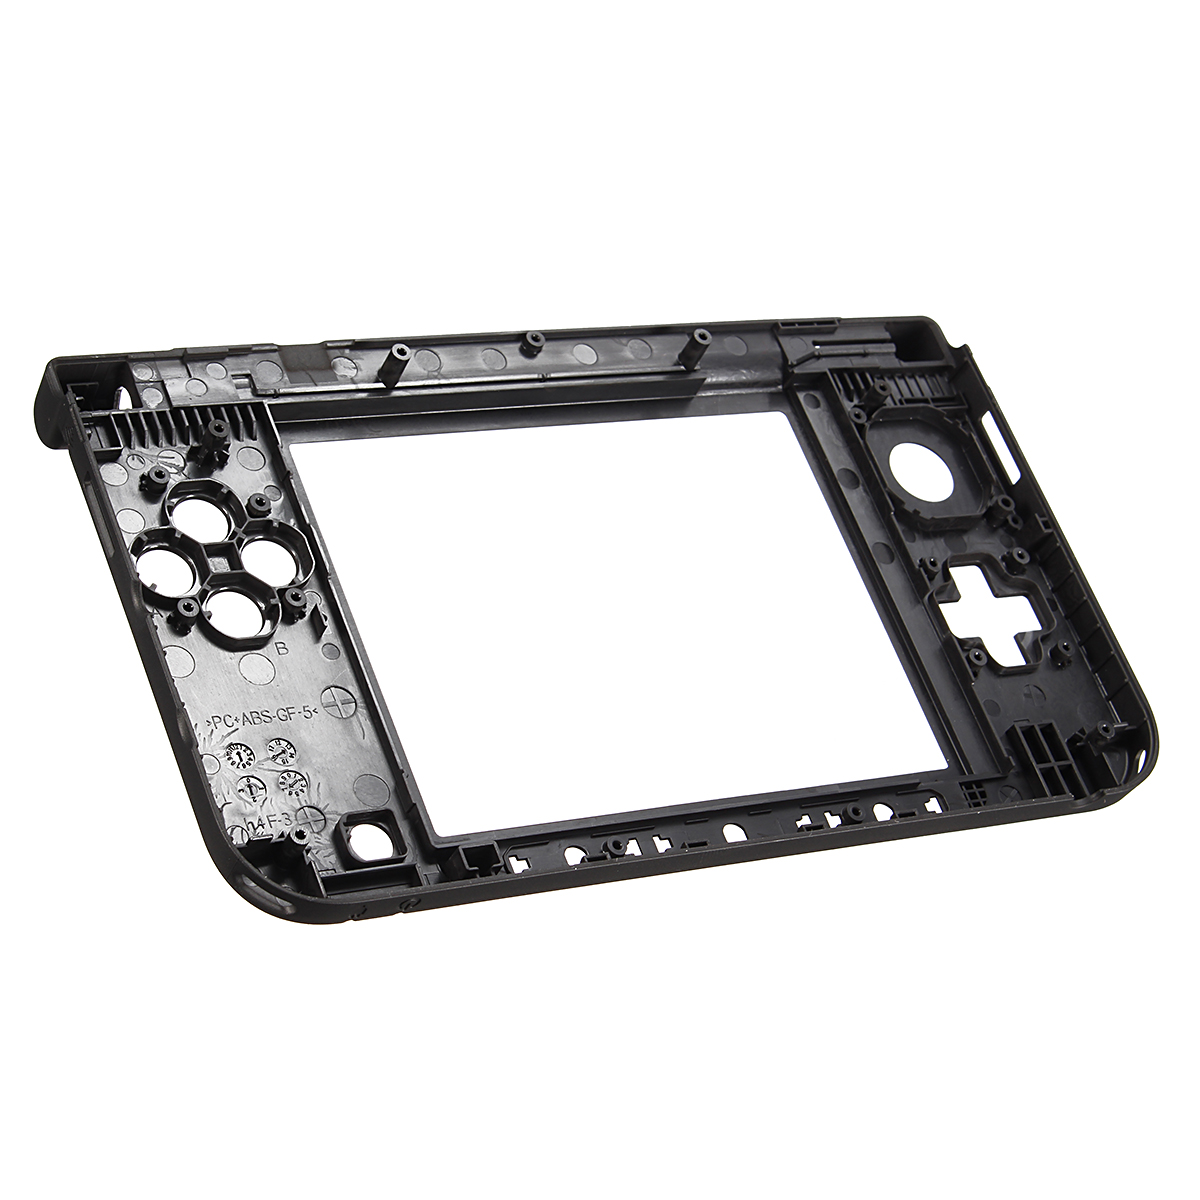 Replacement Bottom Middle Frame Housing Shell Cover Case for Nintendo 3DS XL 3DS LL Game Console 11